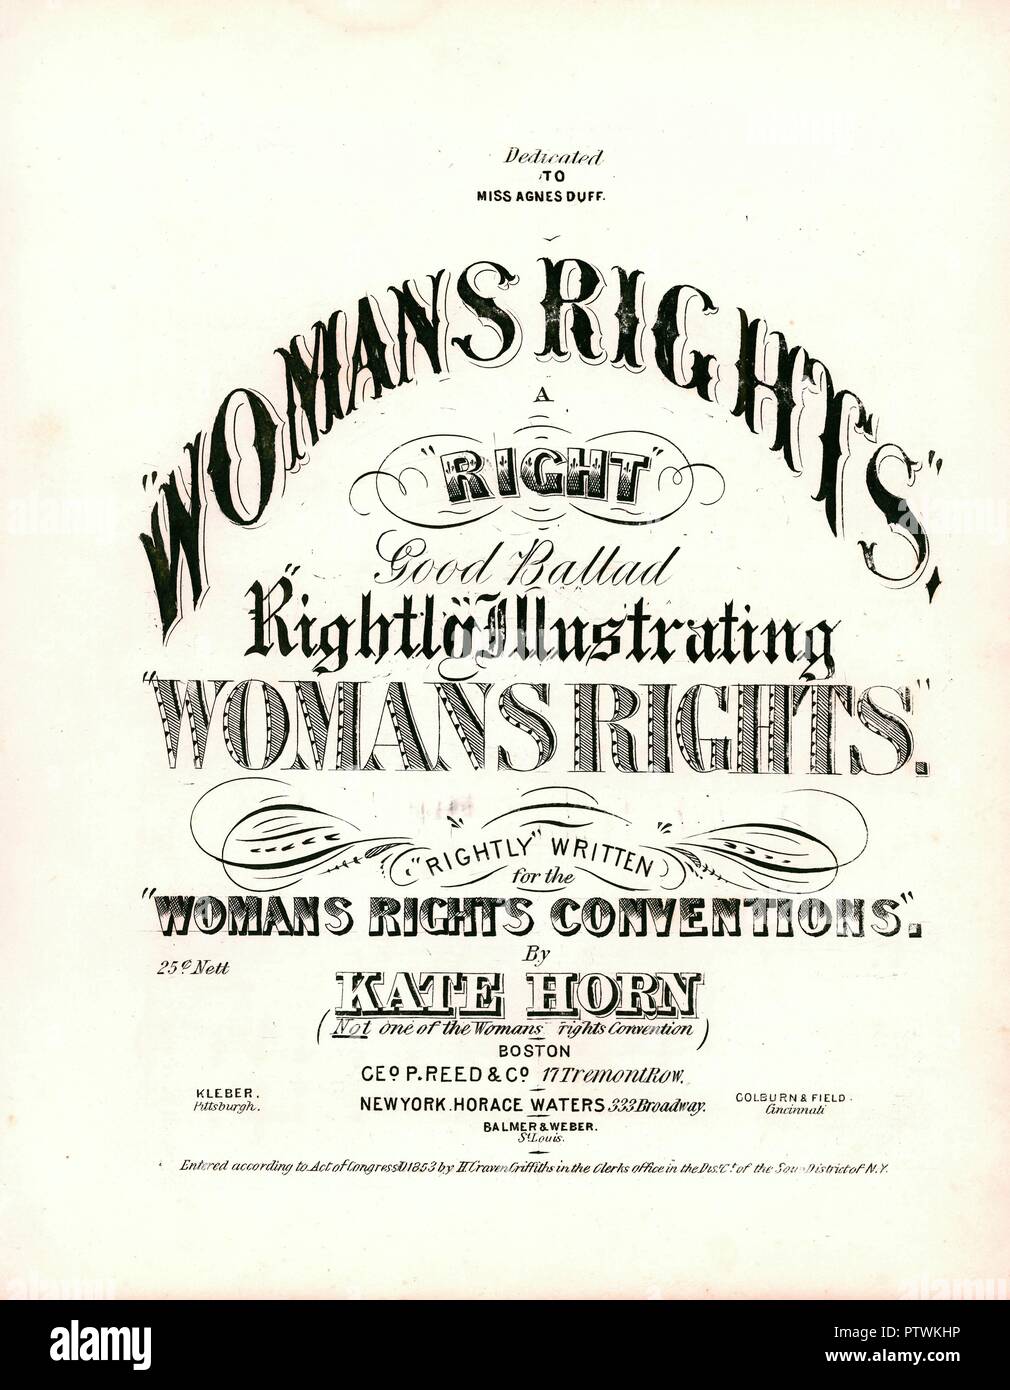 Sheet music cover for Kate Horn's anti-suffrage song 'Woman's Rights,' published in Boston, Massachusetts, for the American market, 1853. () Stock Photo